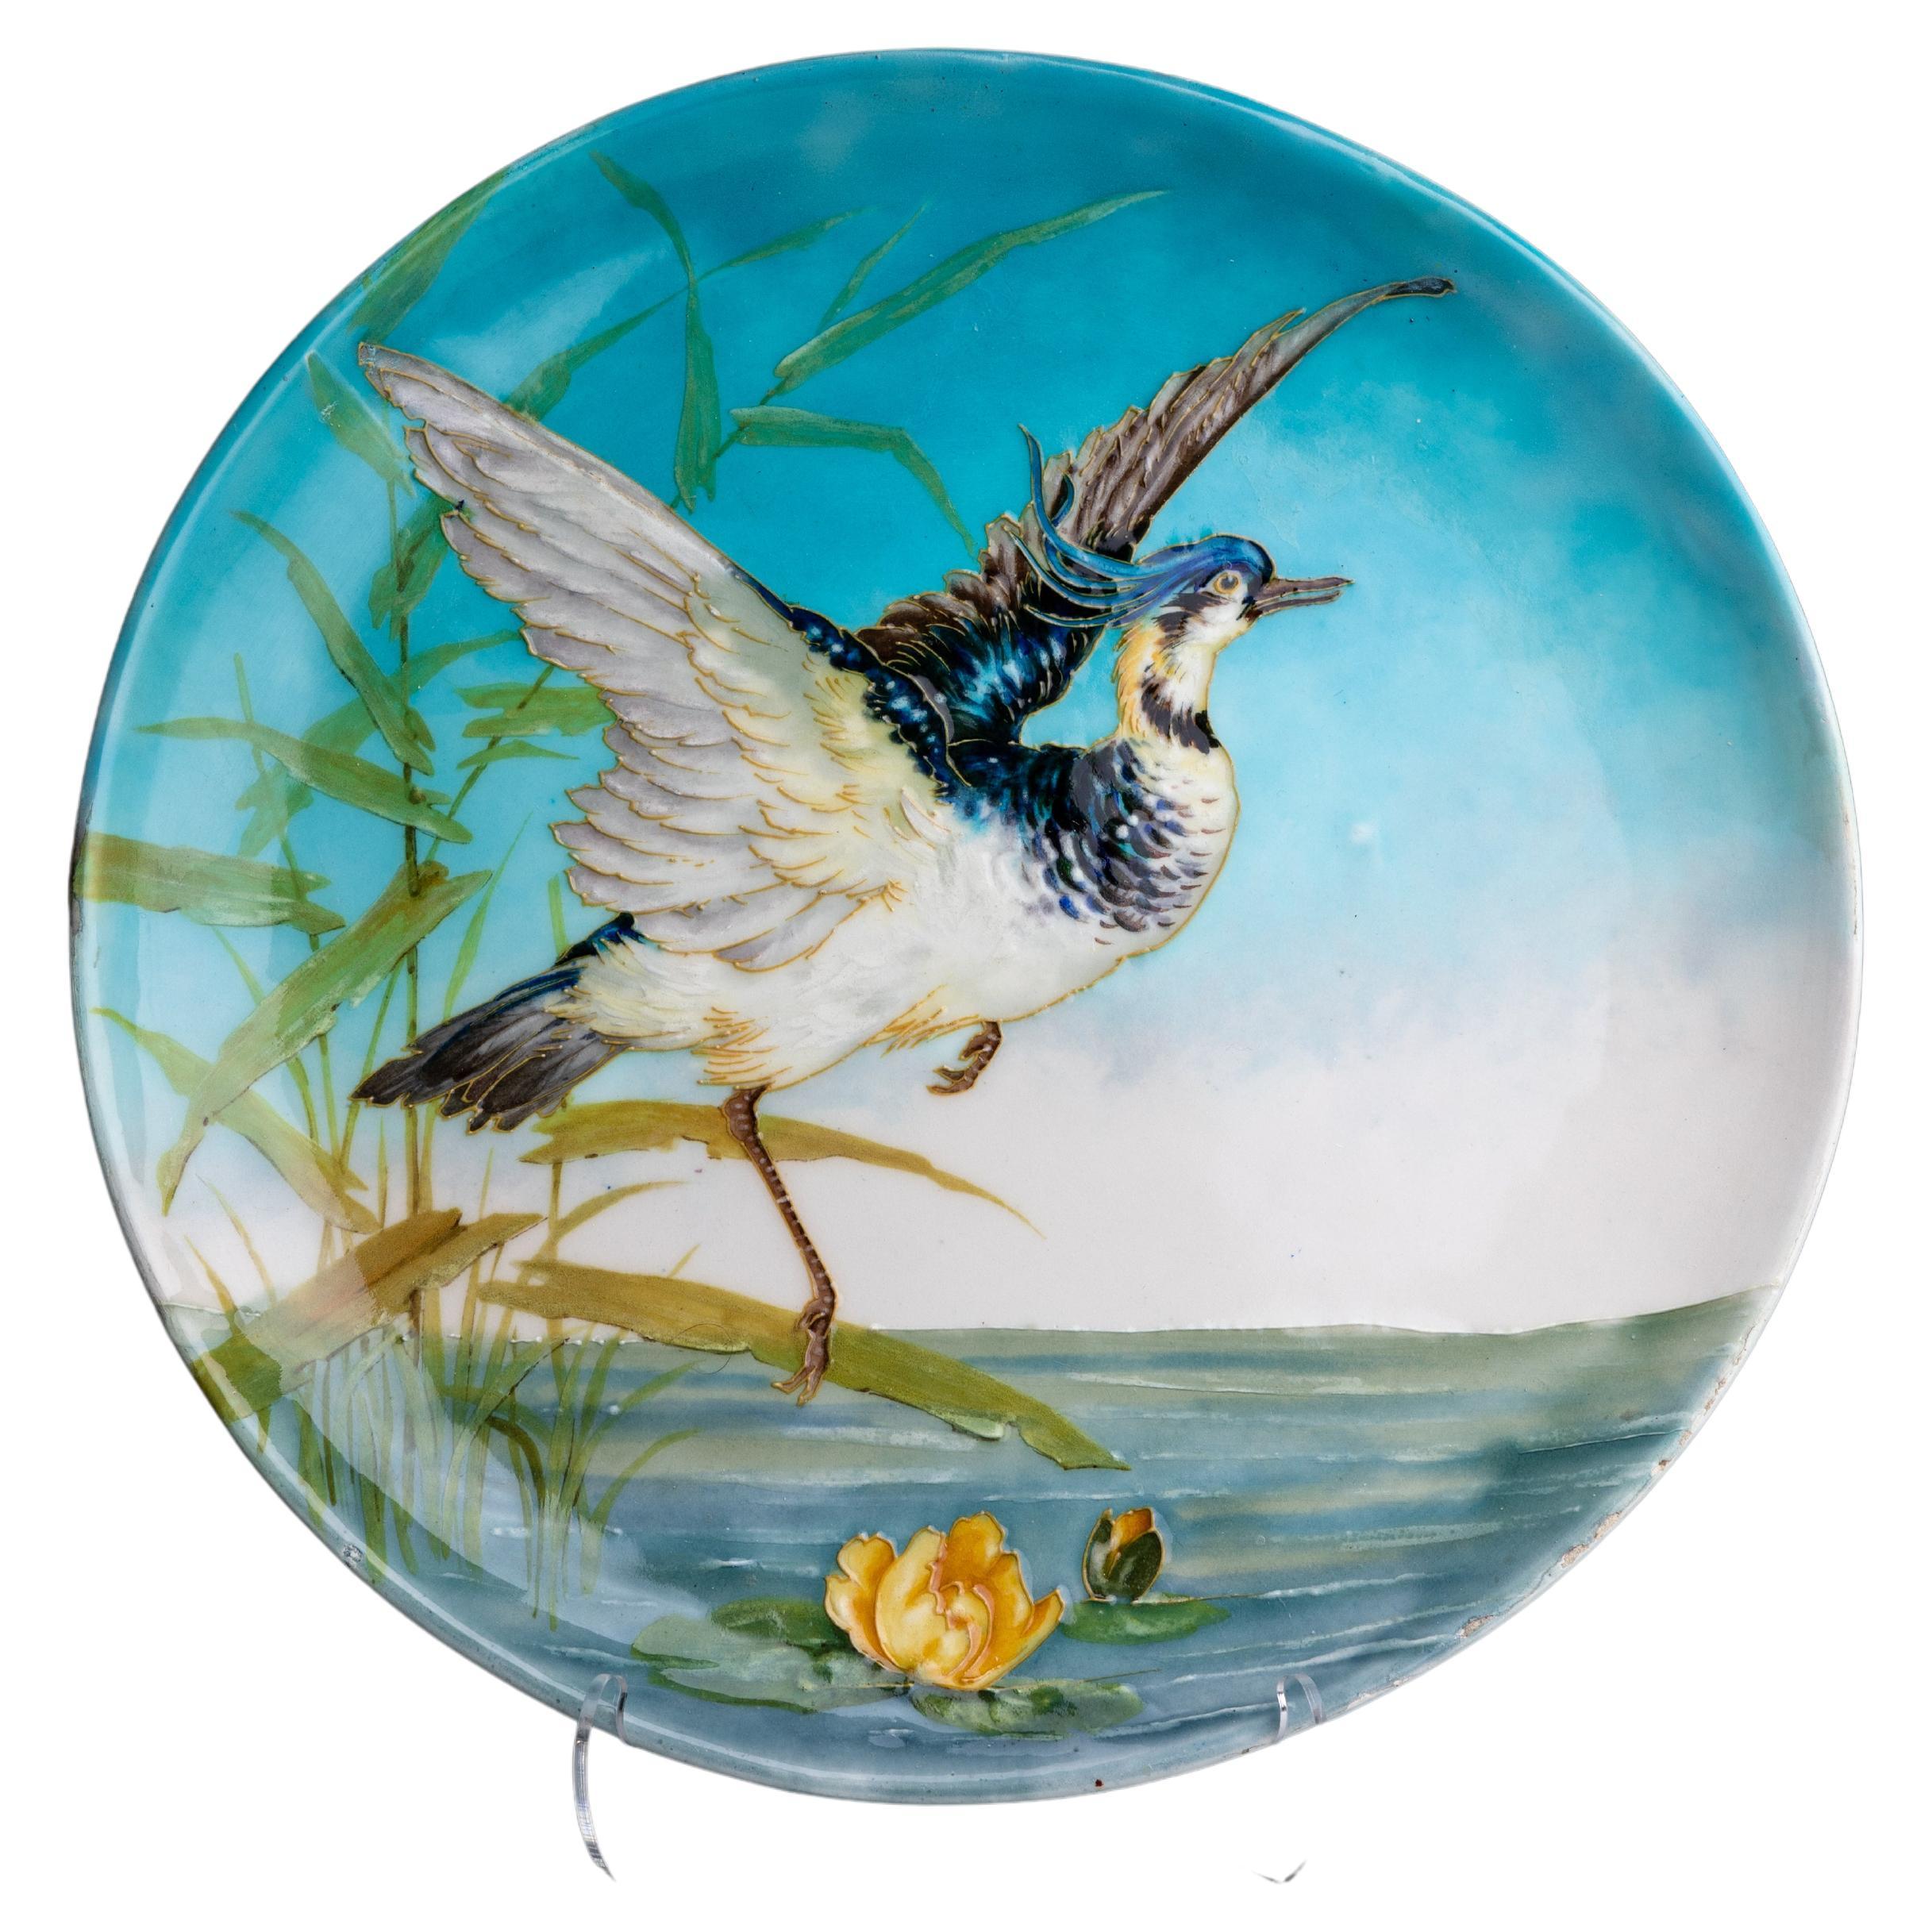 Early 20th Century French French Porcelain Plate by Paul Milet